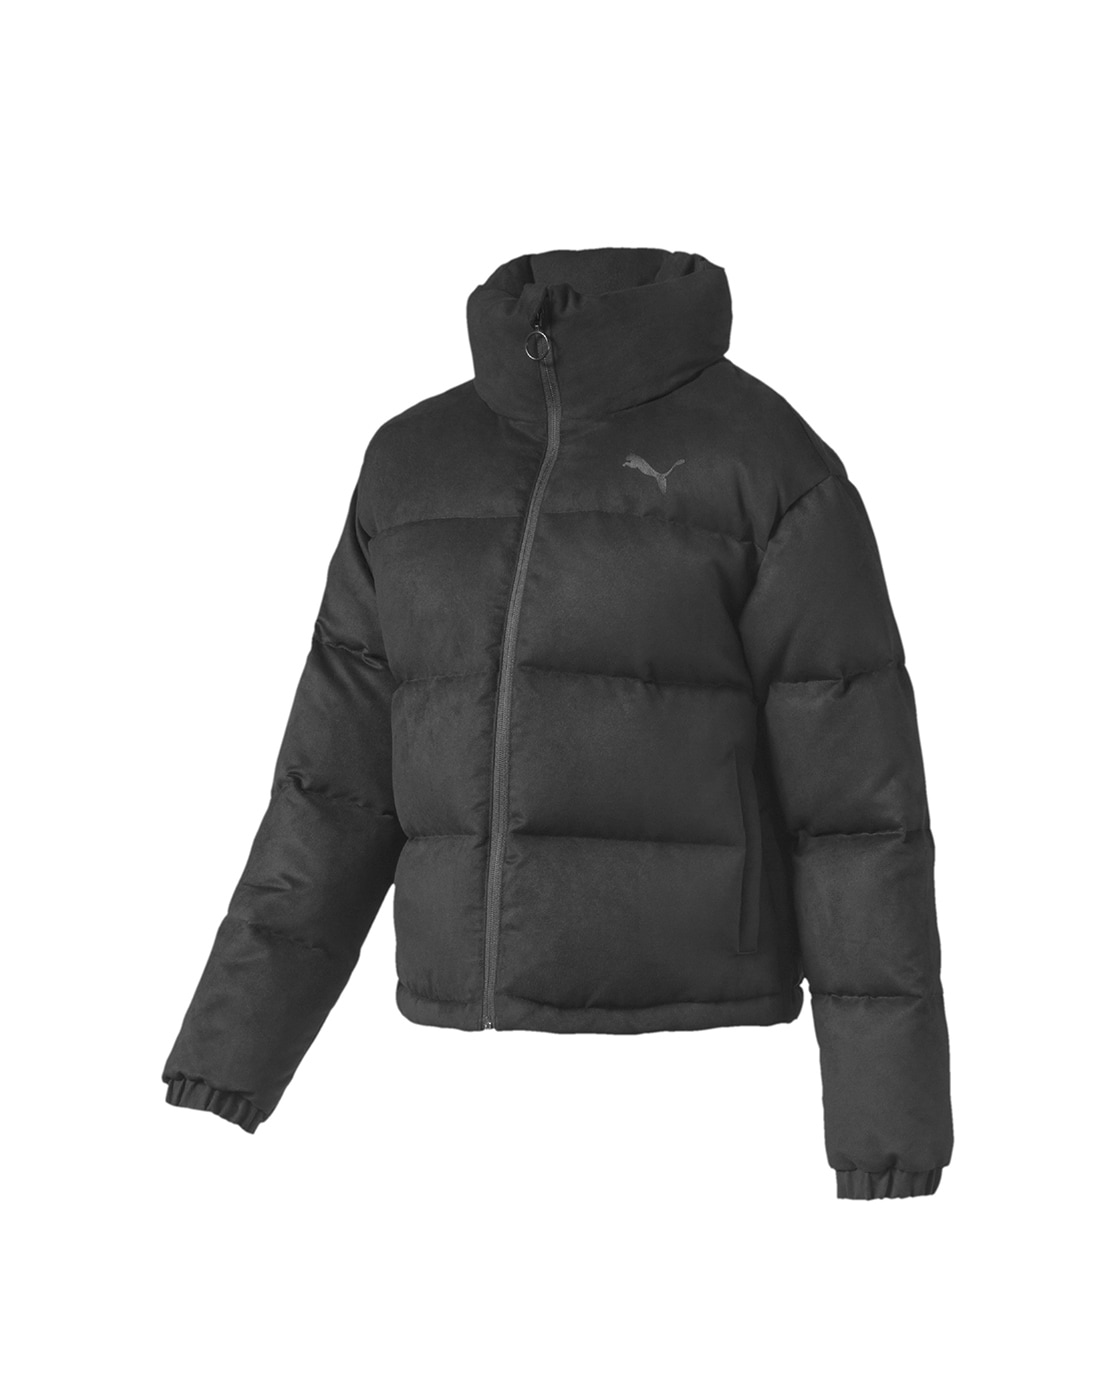 puma long quilted puffer coat